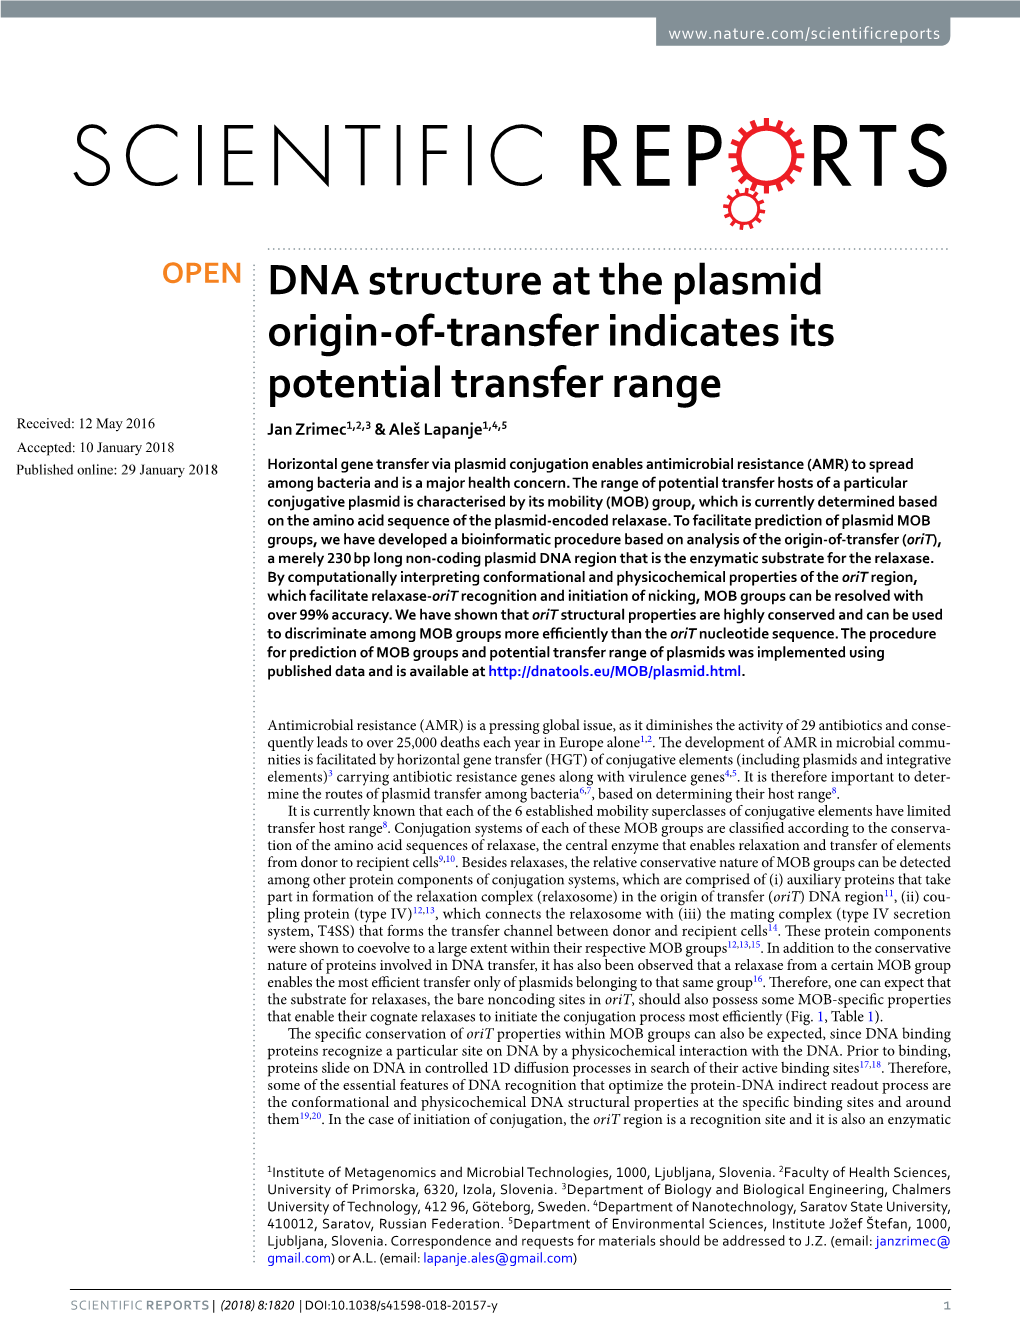 DNA Structure at the Plasmid Origin-Of-Transfer Indicates Its